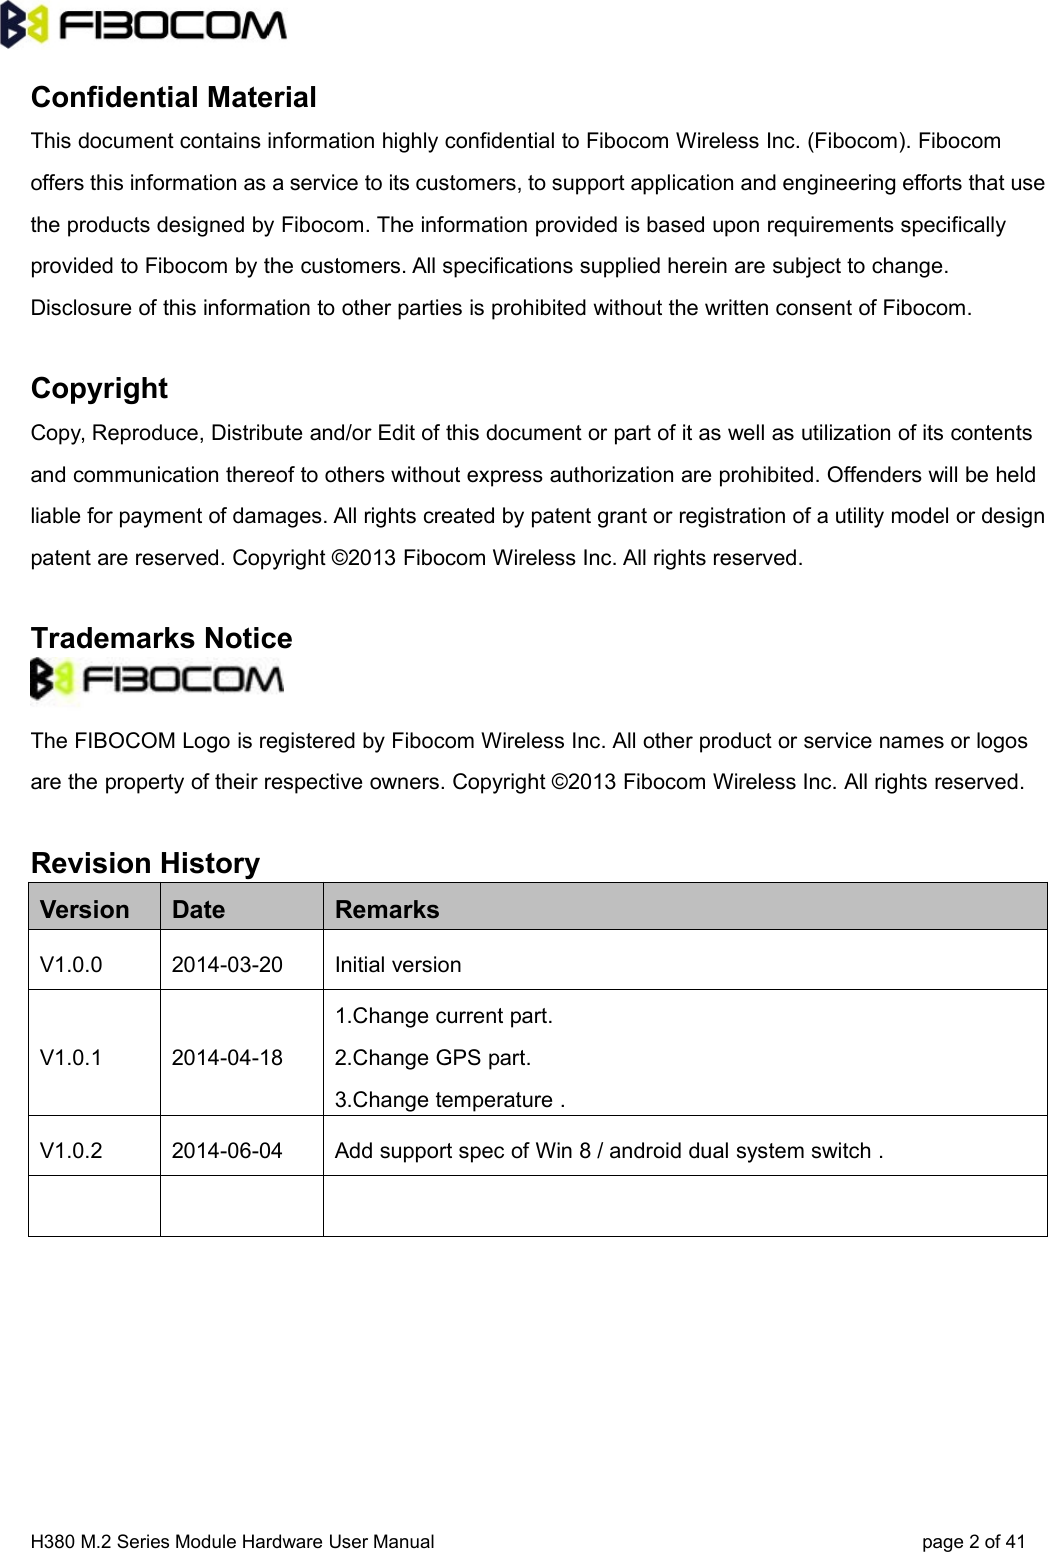 H380 M.2 Series Module Hardware User Manual page 2of 41Confidential MaterialThis document contains information highly confidential to Fibocom Wireless Inc. (Fibocom). Fibocomoffers this information as a service to its customers, to support application and engineering efforts that usethe products designed by Fibocom. The information provided is based upon requirements specificallyprovided to Fibocom by the customers. All specifications supplied herein are subject to change.Disclosure of this information to other parties is prohibited without the written consent of Fibocom.CopyrightCopy, Reproduce, Distribute and/or Edit of this document or part of it as well as utilization of its contentsand communication thereof to others without express authorization are prohibited. Offenders will be heldliable for payment of damages. All rights created by patent grant or registration of a utility model or designpatent are reserved. Copyright ©2013 Fibocom Wireless Inc. All rights reserved.Trademarks NoticeThe FIBOCOM Logo is registered by Fibocom Wireless Inc. All other product or service names or logosare the property of their respective owners. Copyright ©2013 Fibocom Wireless Inc. All rights reserved.Revision HistoryVersion Date RemarksV1.0.0 2014-03-20 Initial versionV1.0.1 2014-04-181.Change current part.2.Change GPS part.3.Change temperature .V1.0.2 2014-06-04 Add support spec of Win 8 / android dual system switch .